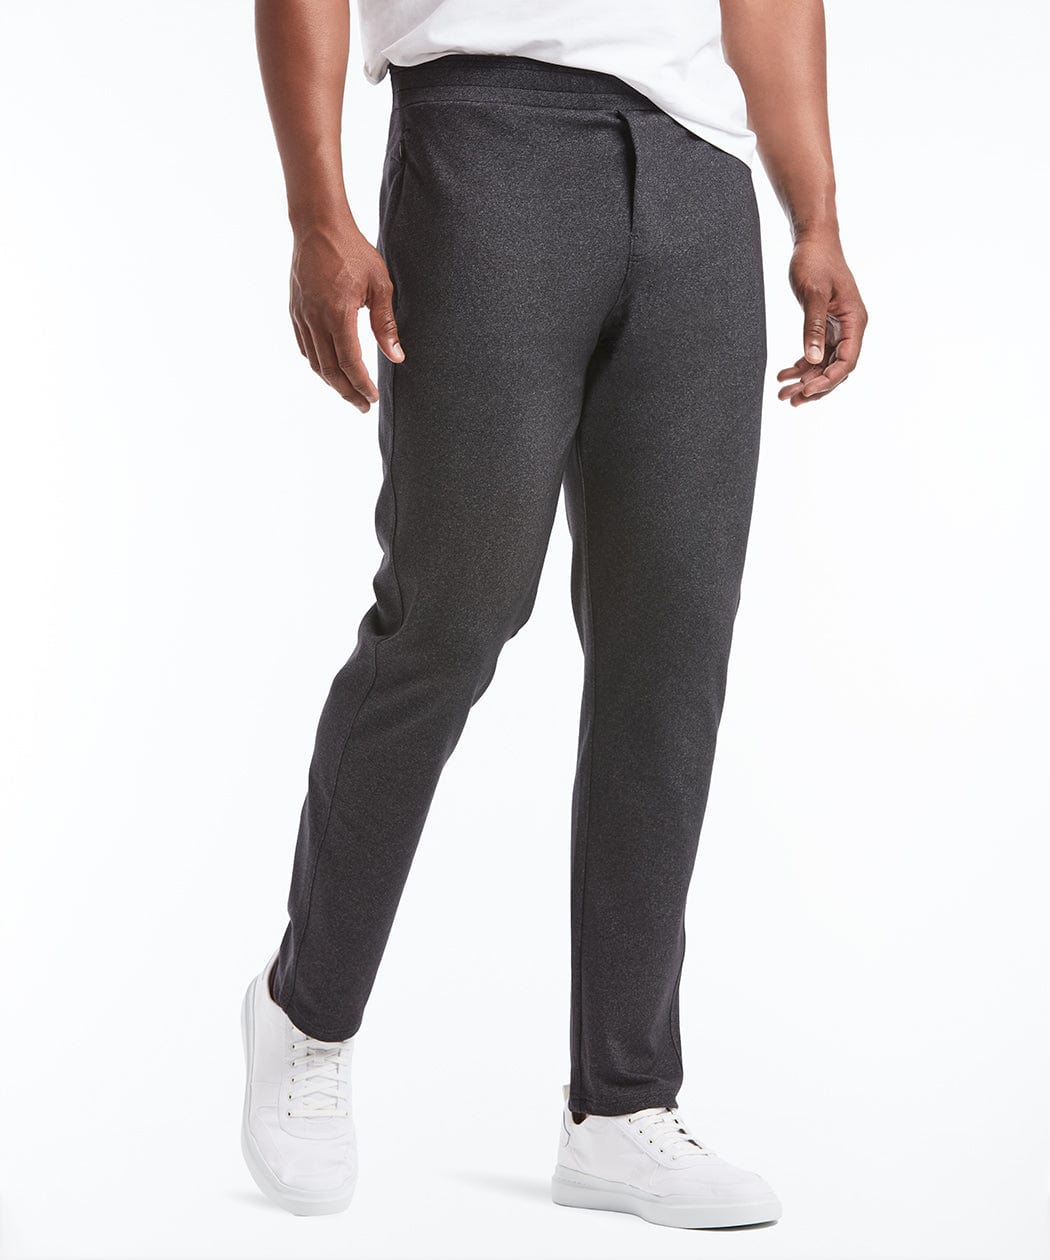 All Day Every Day Pant, Men's Fog